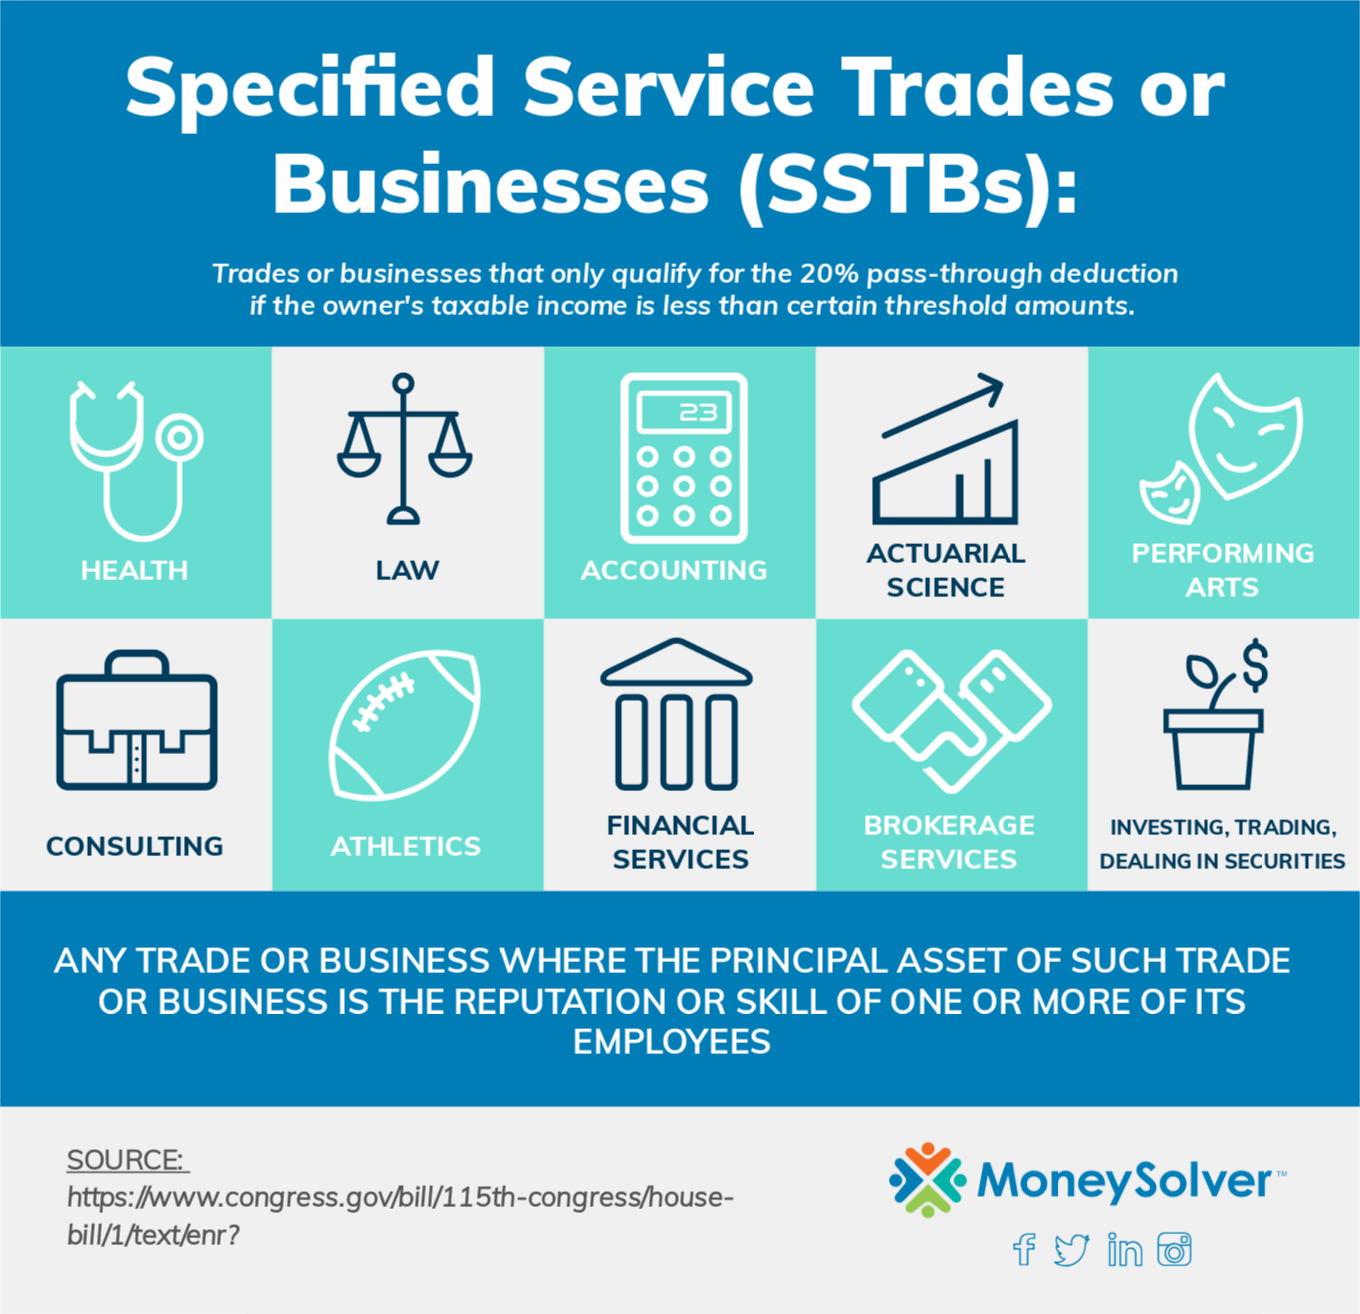 Specified Service Trades or Businesses (SSTBs) that don't qualify for the 20% pass-through deduction